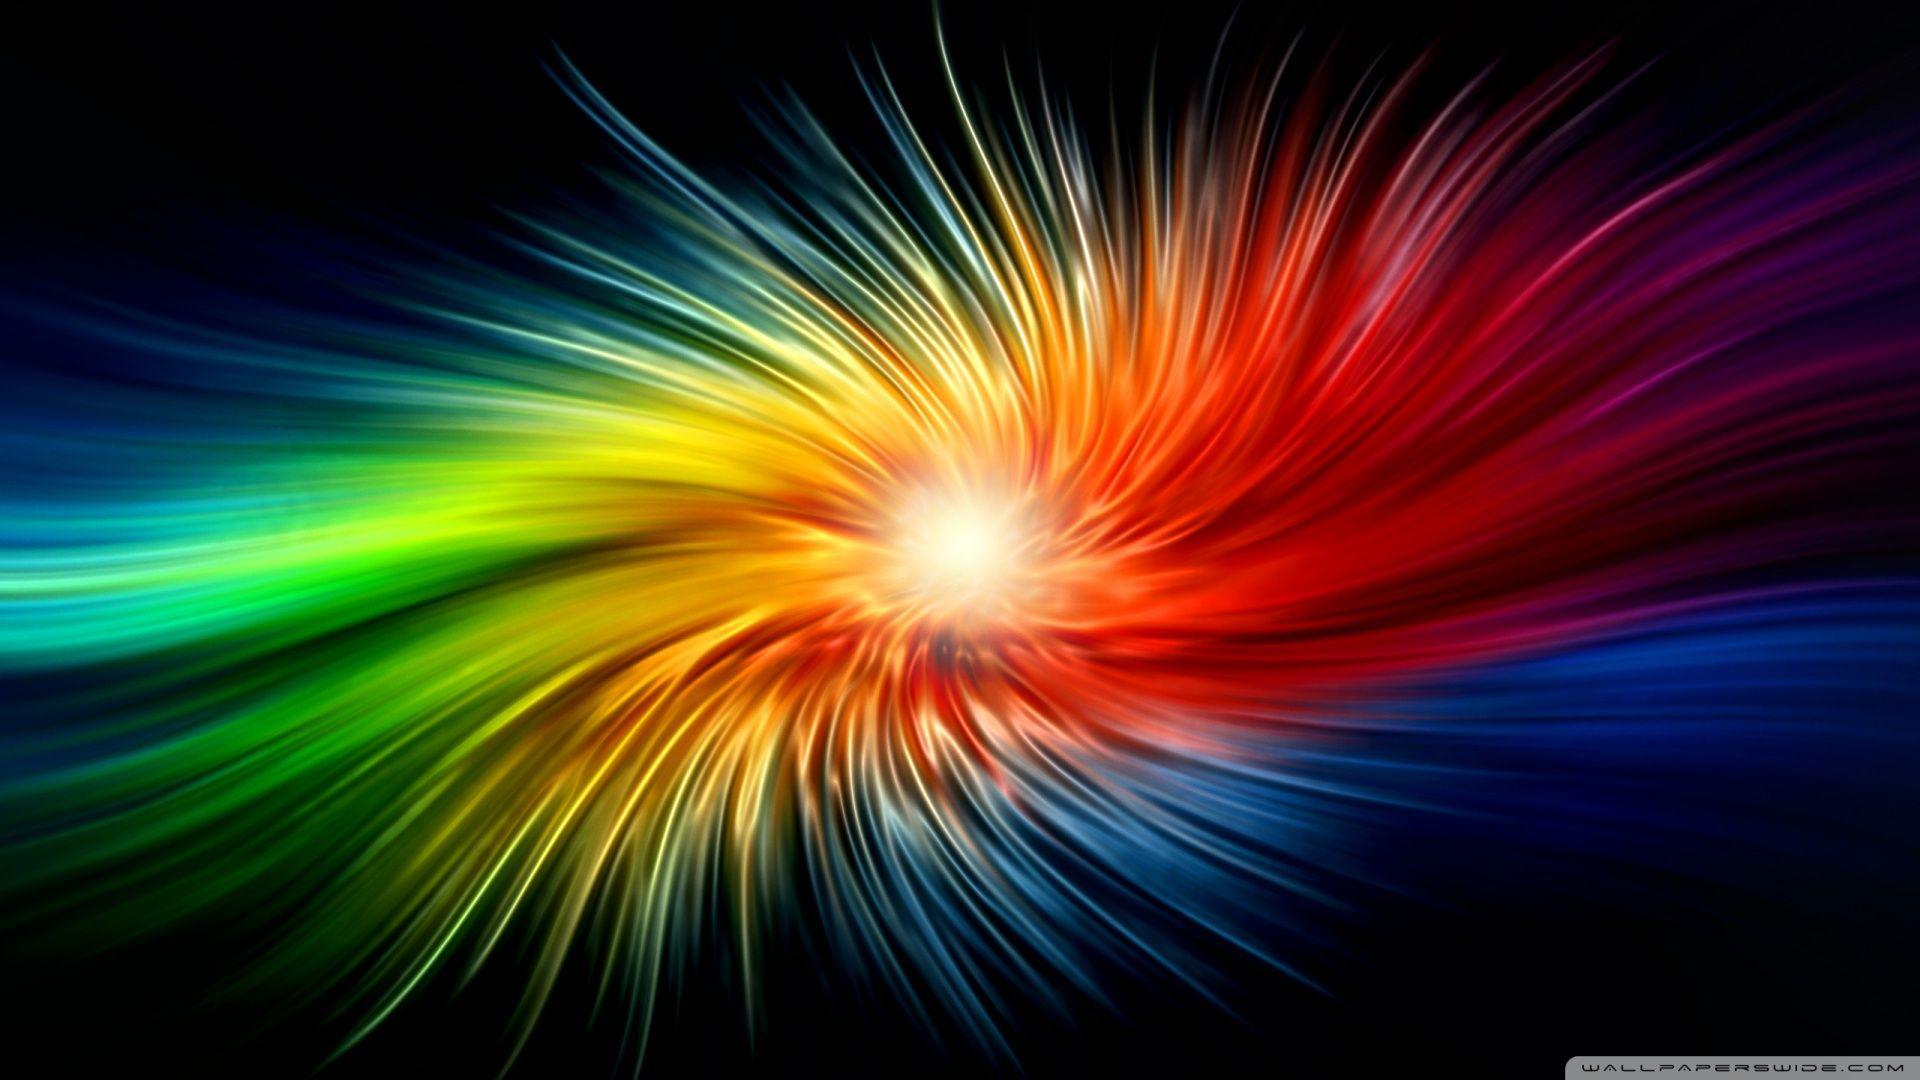 1920x1080 Resolution Colorful Abstract Art 1080P Laptop Full HD Wallpaper   Wallpapers Den